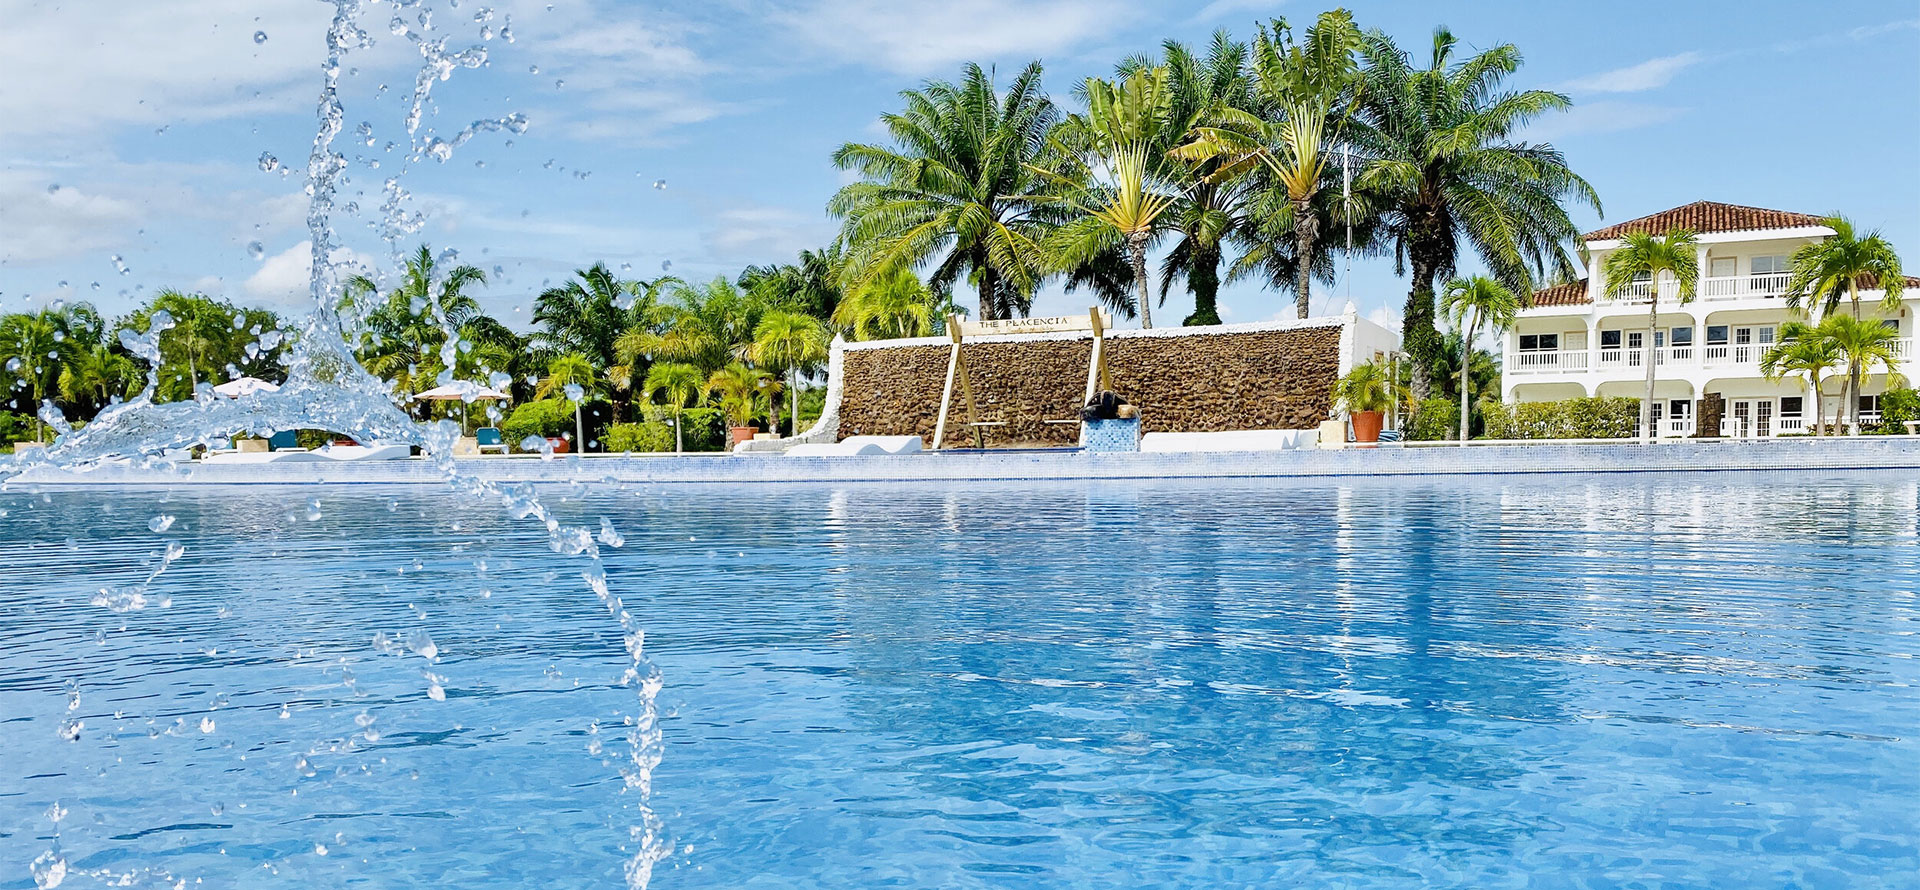 Swimming pool in Belize all inclusive family resort.